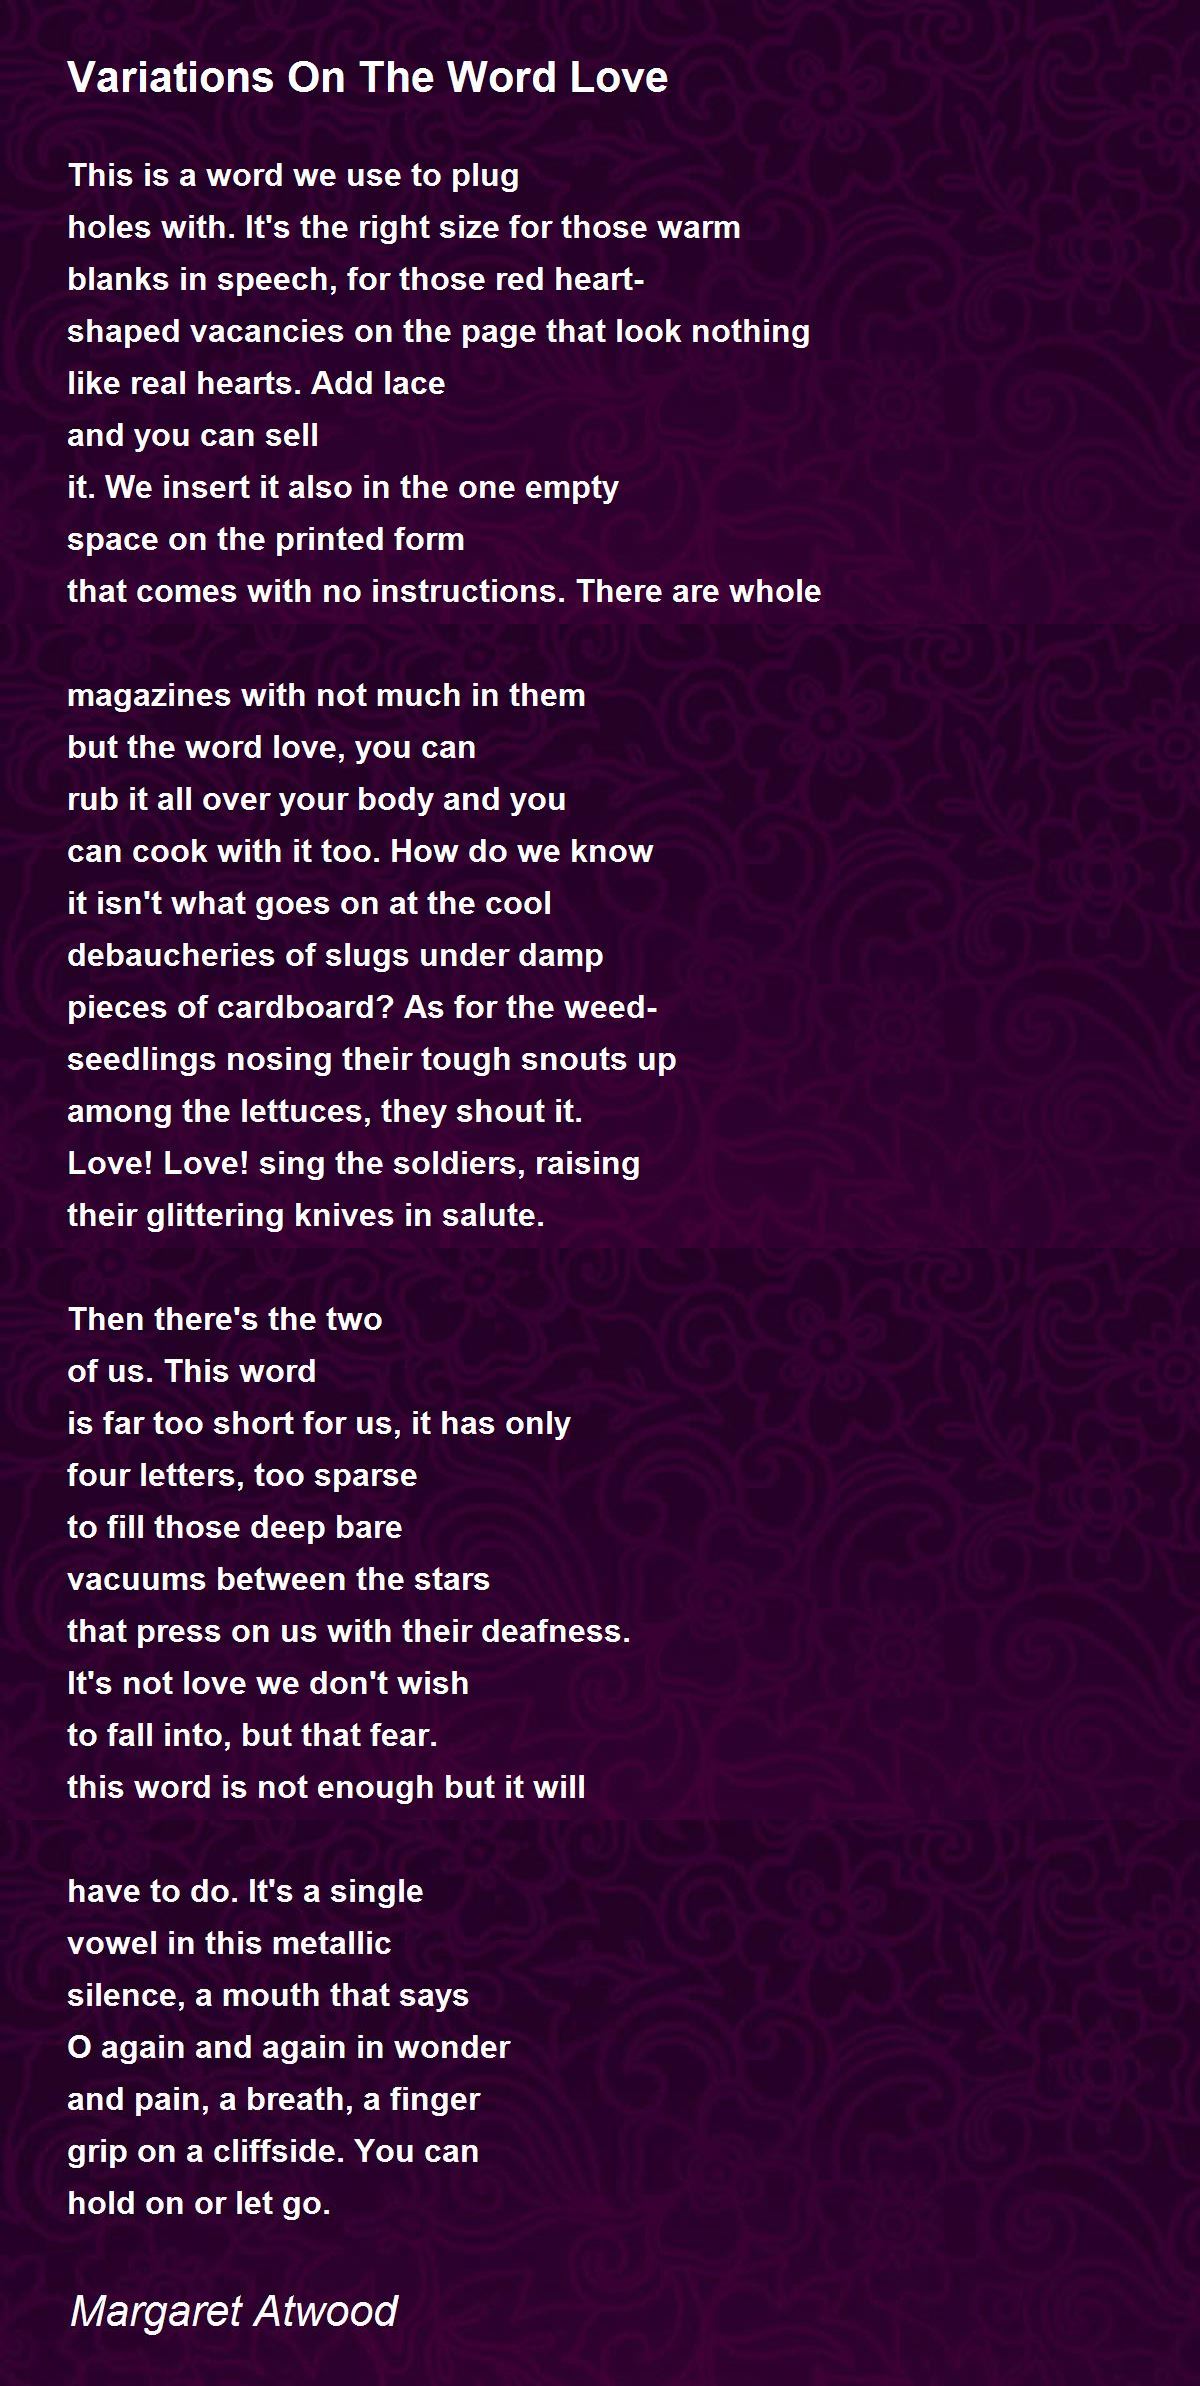 Variations On The Word Love Poem by Margaret Atwood - Poem Hunter